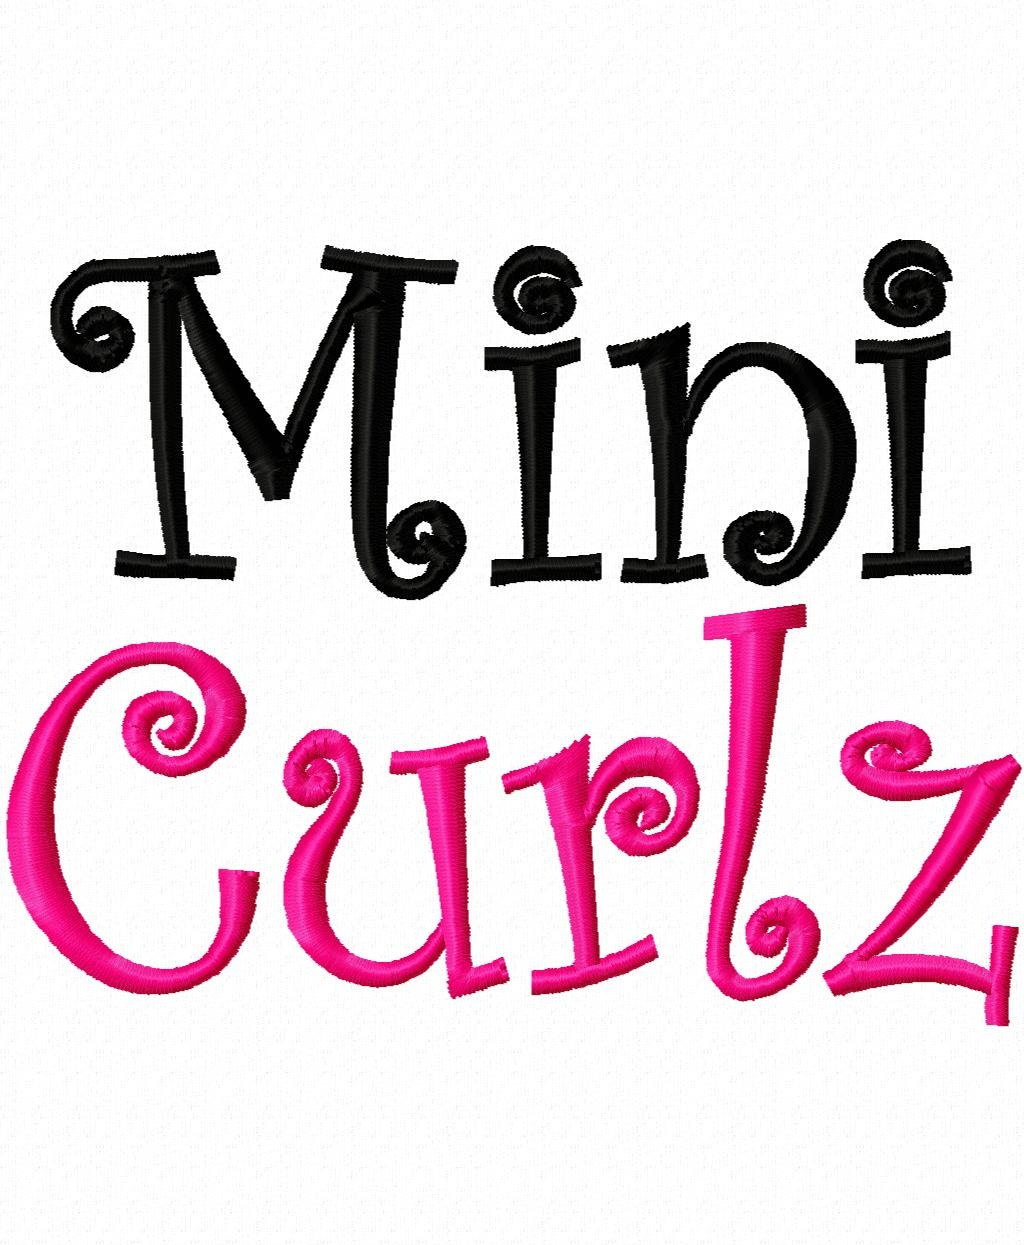 Free Curlz Embroidery Font Download